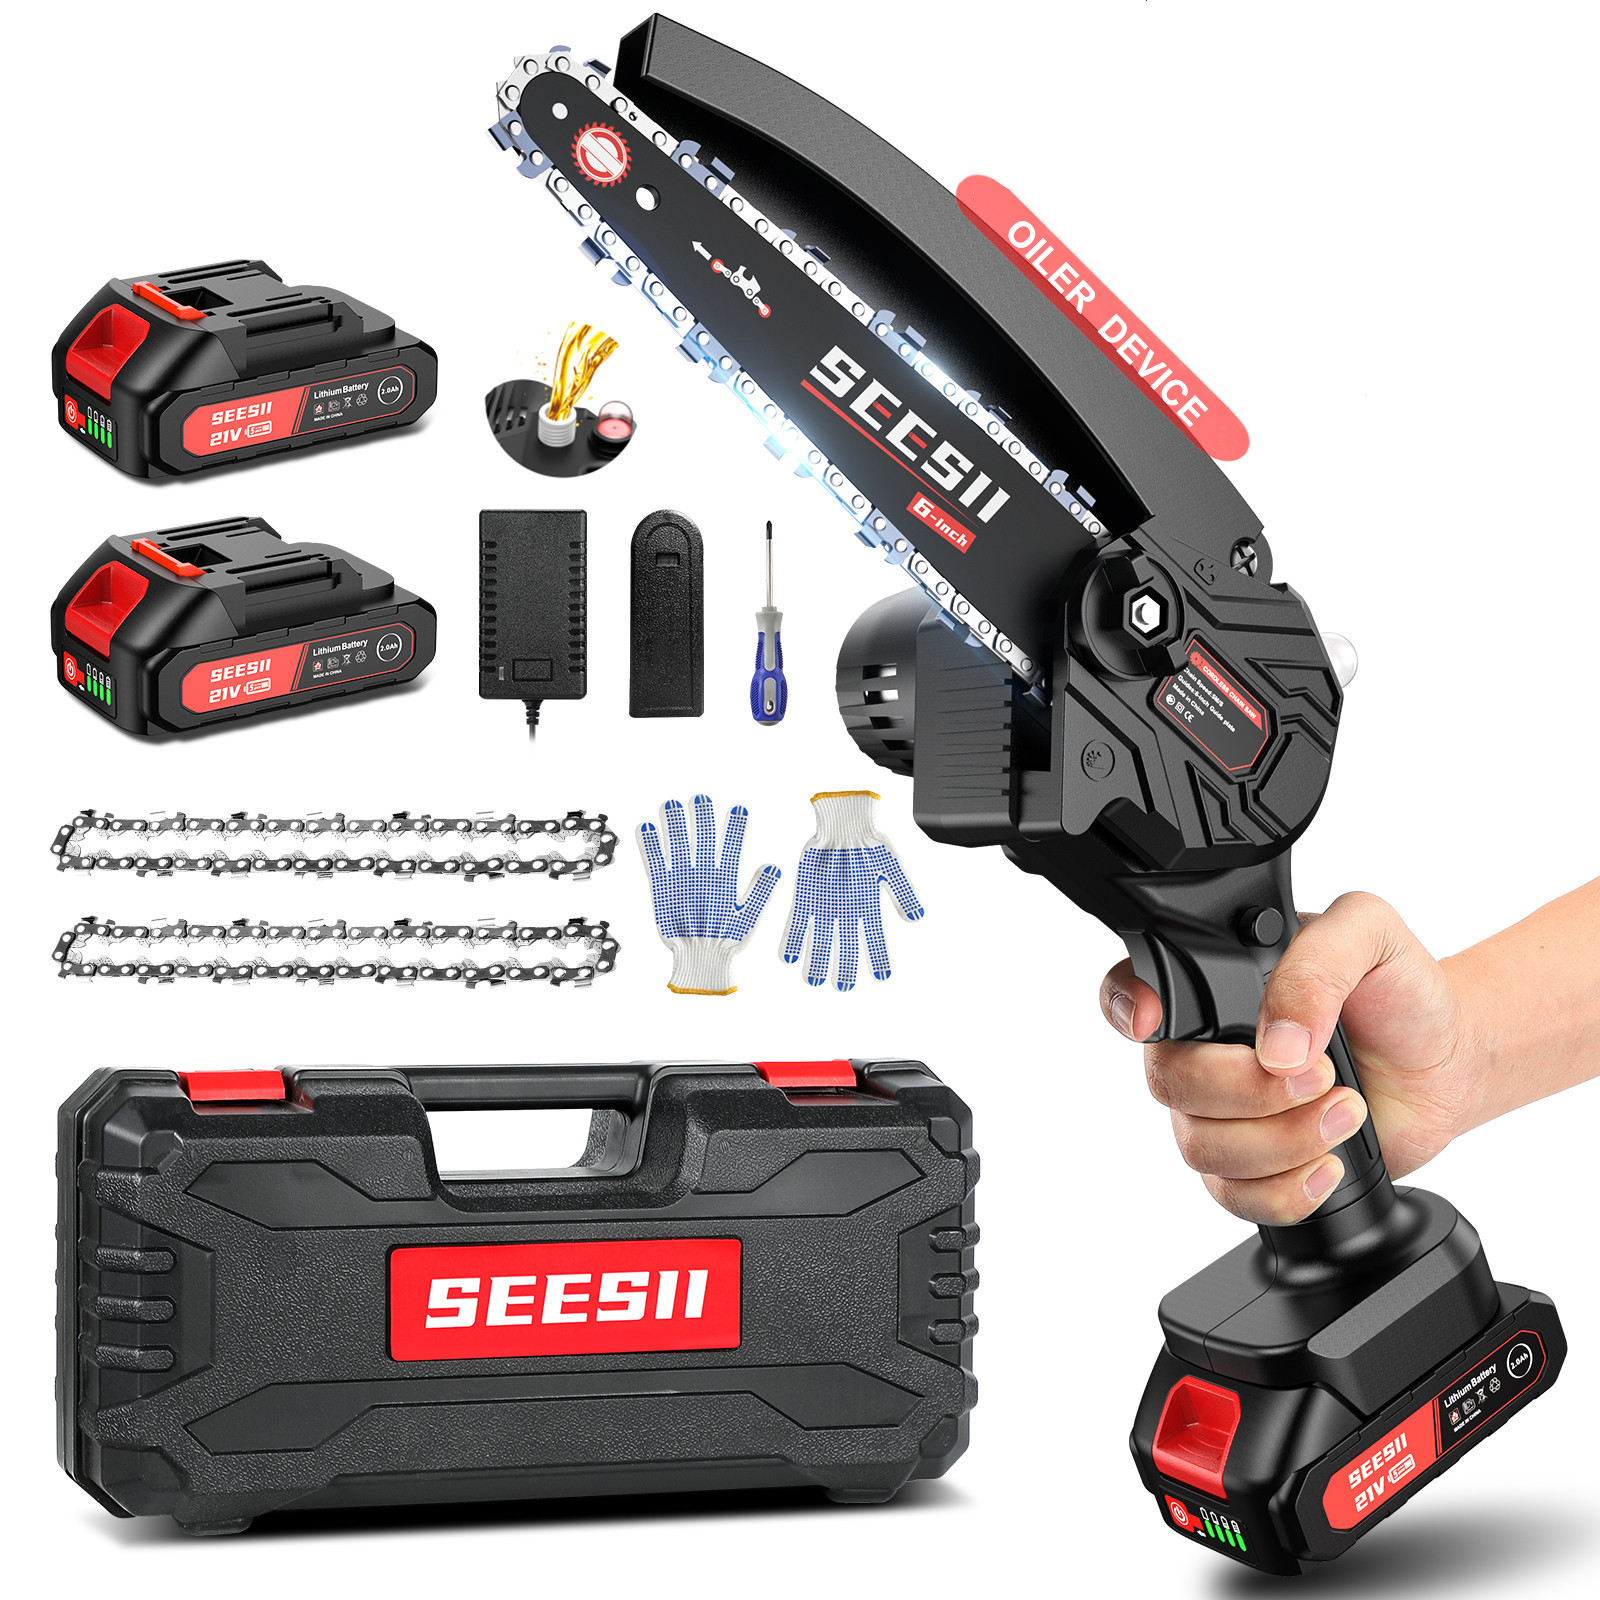 6-Mini Chainsaw,SeeSii Cordless Chainsaw w/ 2x2000mAh Batteries & Oiler System[2023 Upgrade],Handheld Electric Chainsaw w/Safety Lock,Battery Powered Chainsaw for Wood Cutting Tree Trimming